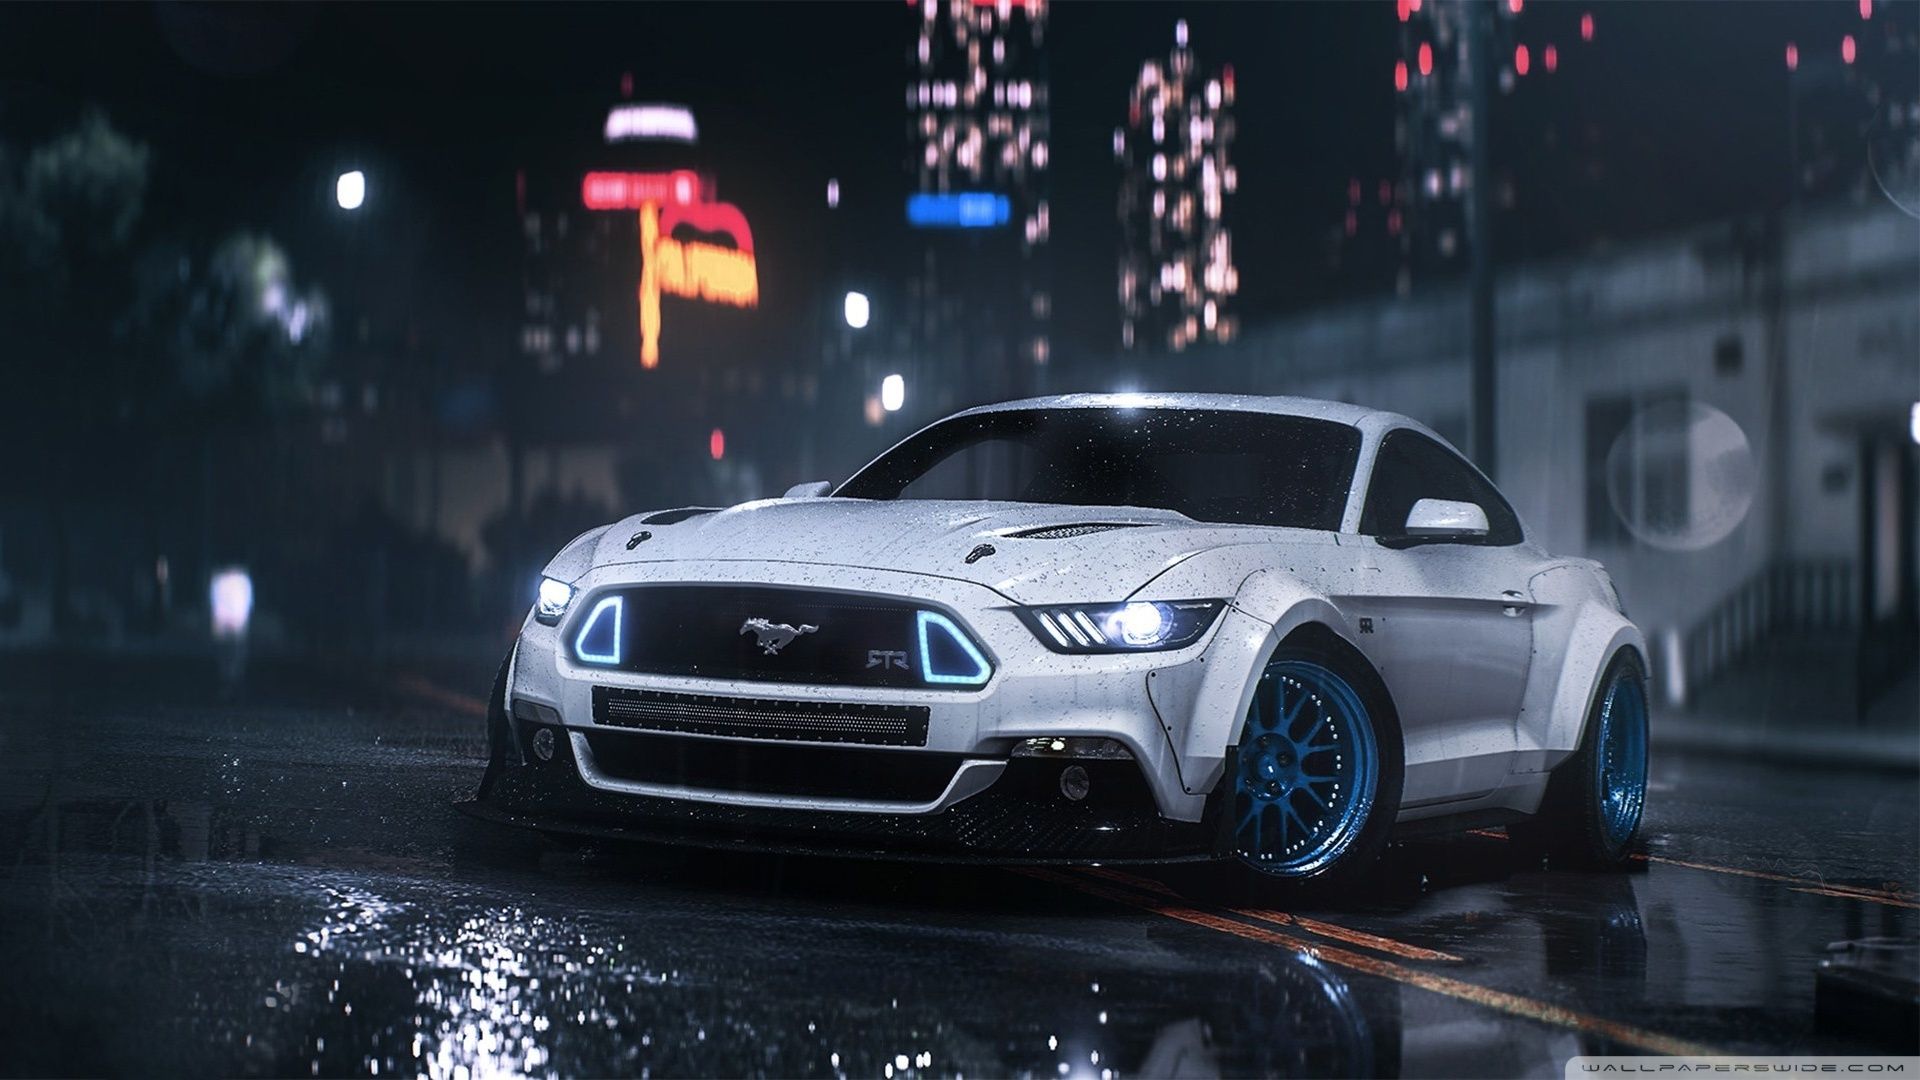 Ford HD Wallpaper Free Ford HD Background